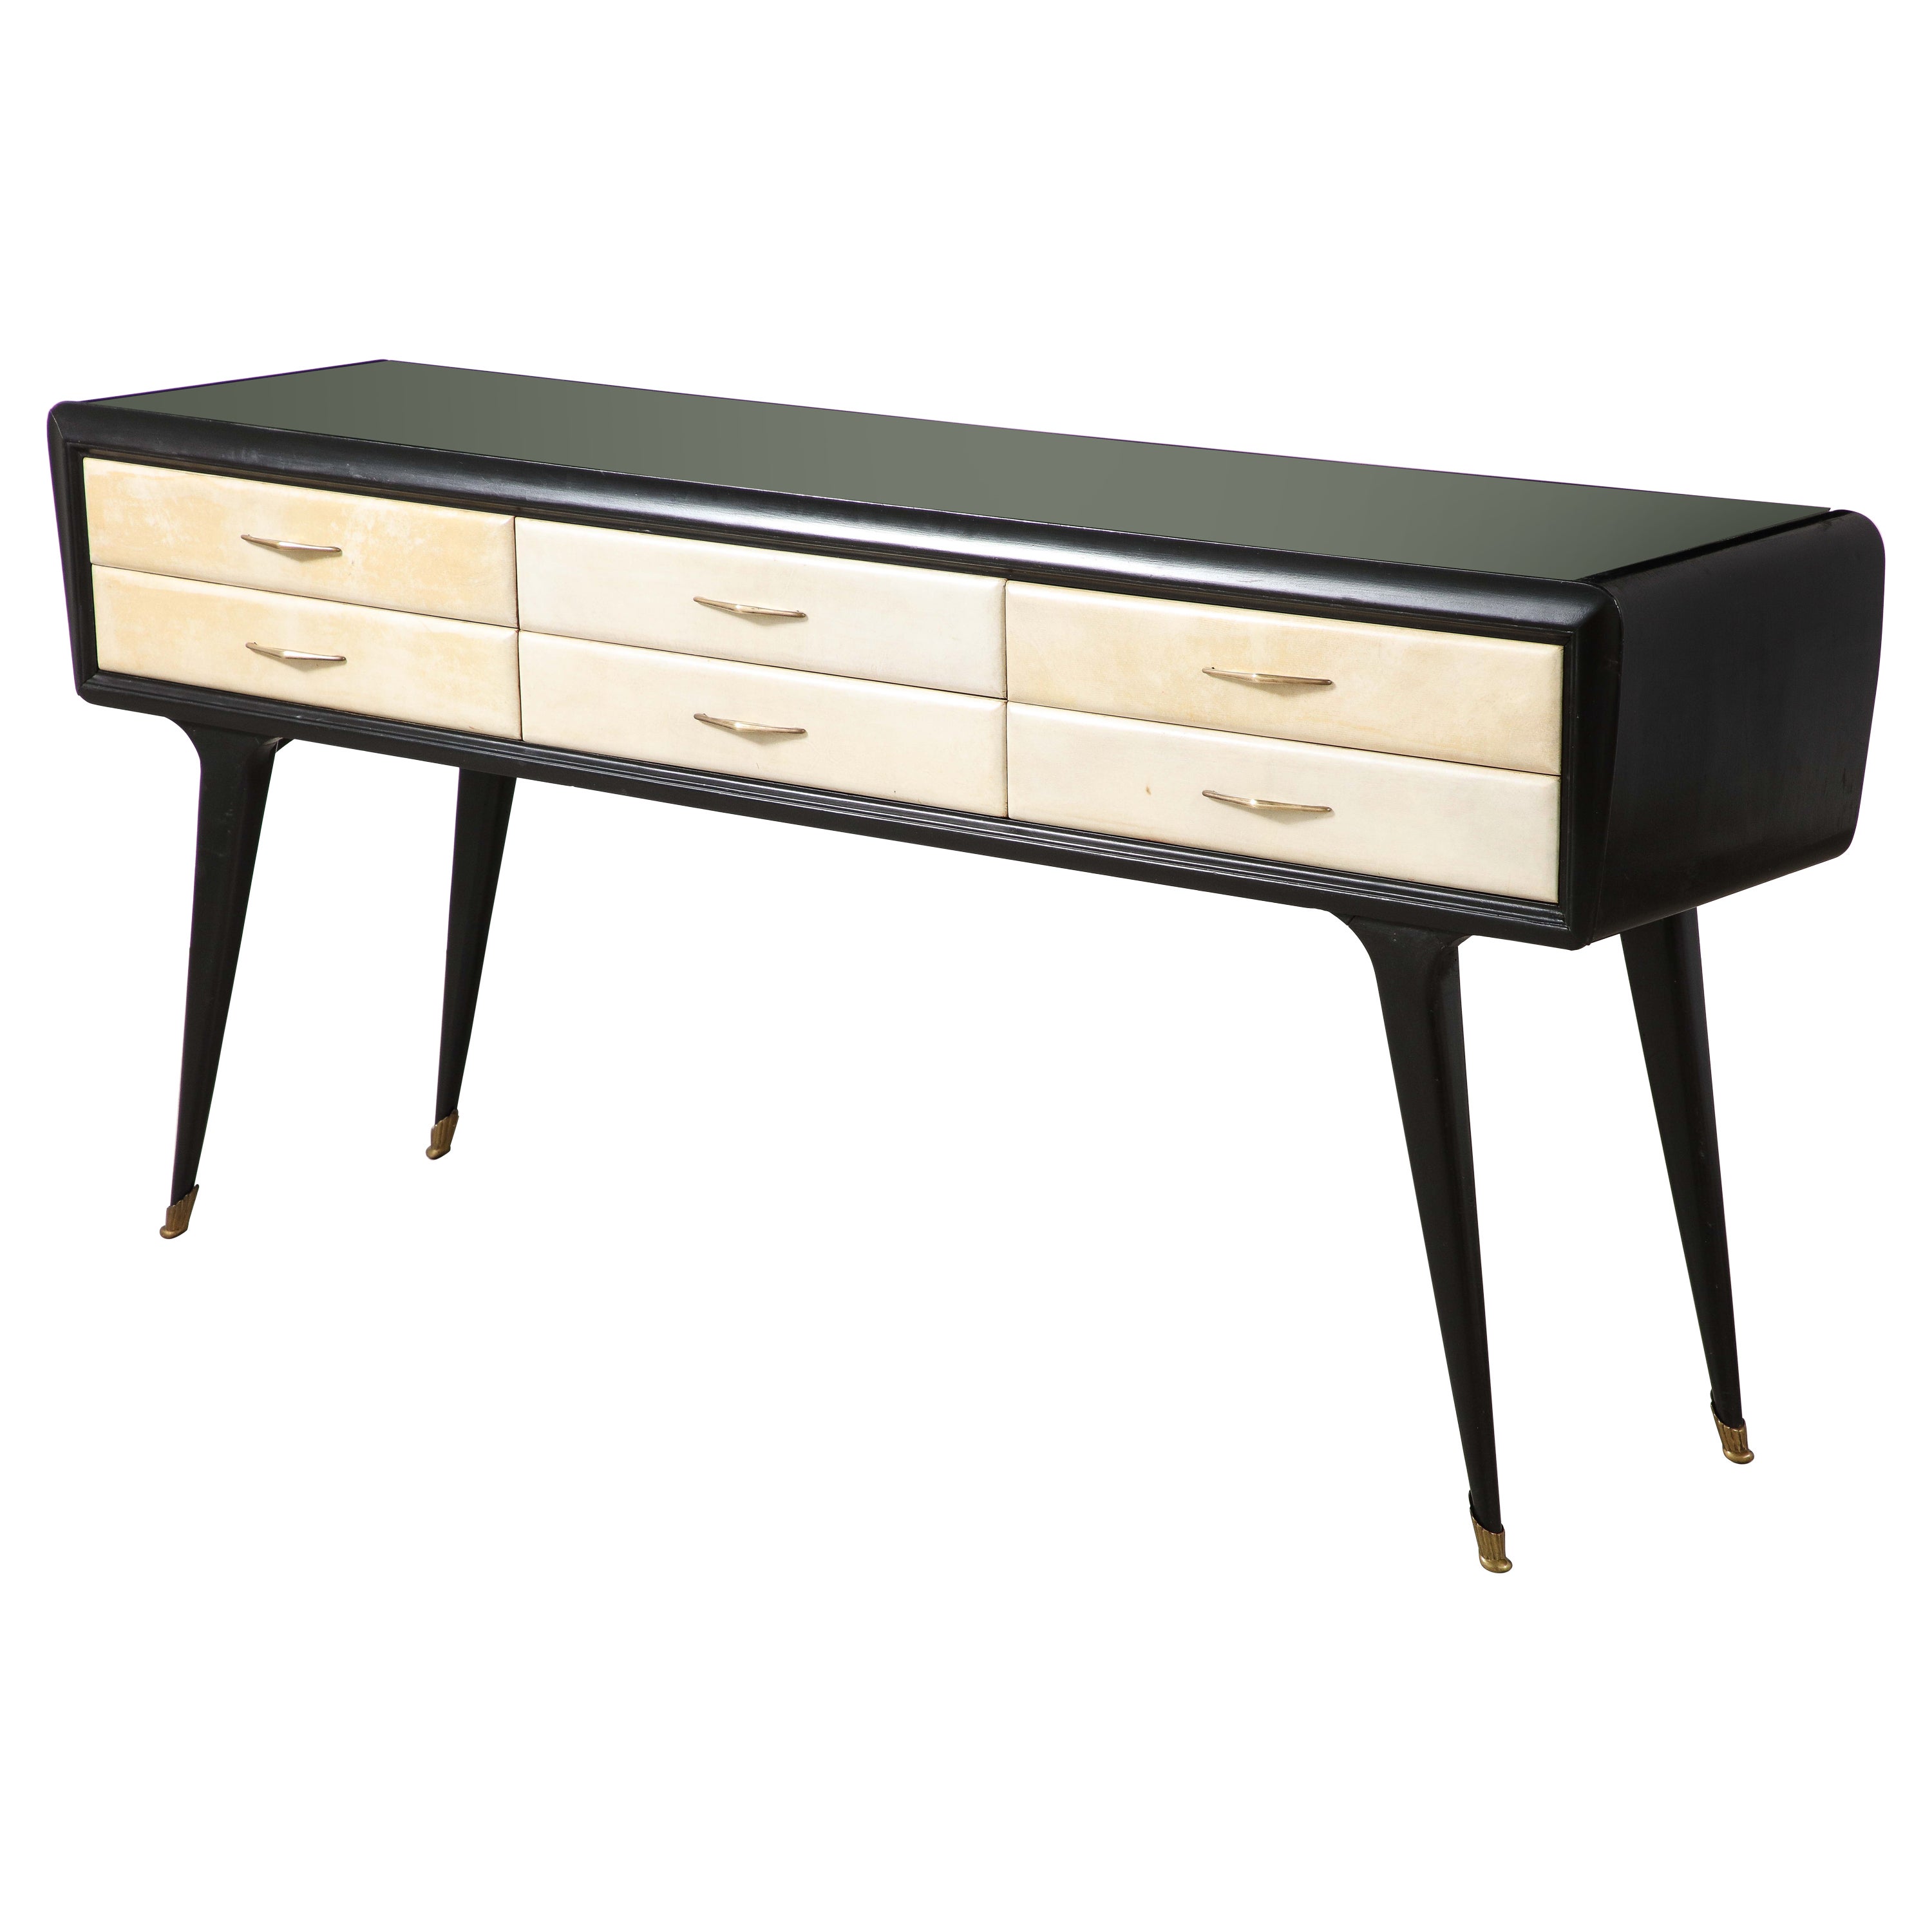 Italian Art Deco Ebonized and Vellum Sideboard with Inset Glass Top, circa 1940 For Sale